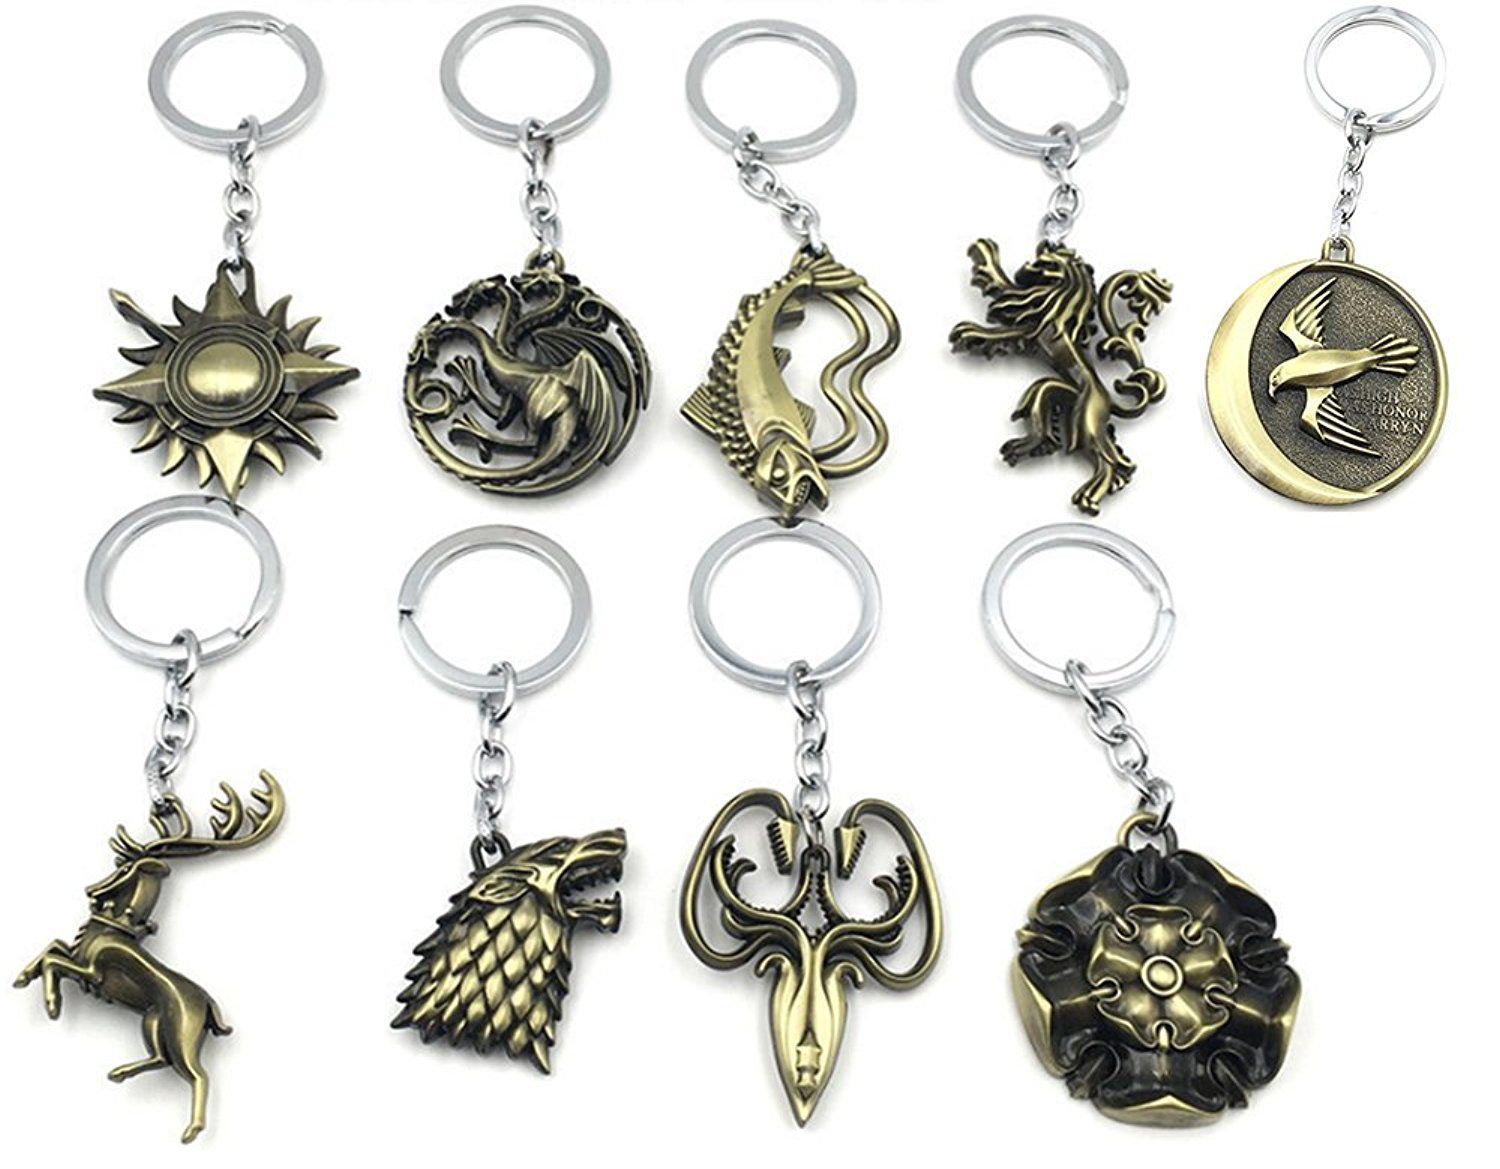 Chaveiros-Game-of-Thrones-House-Sigils-Inspired-Charms-Keychains-02